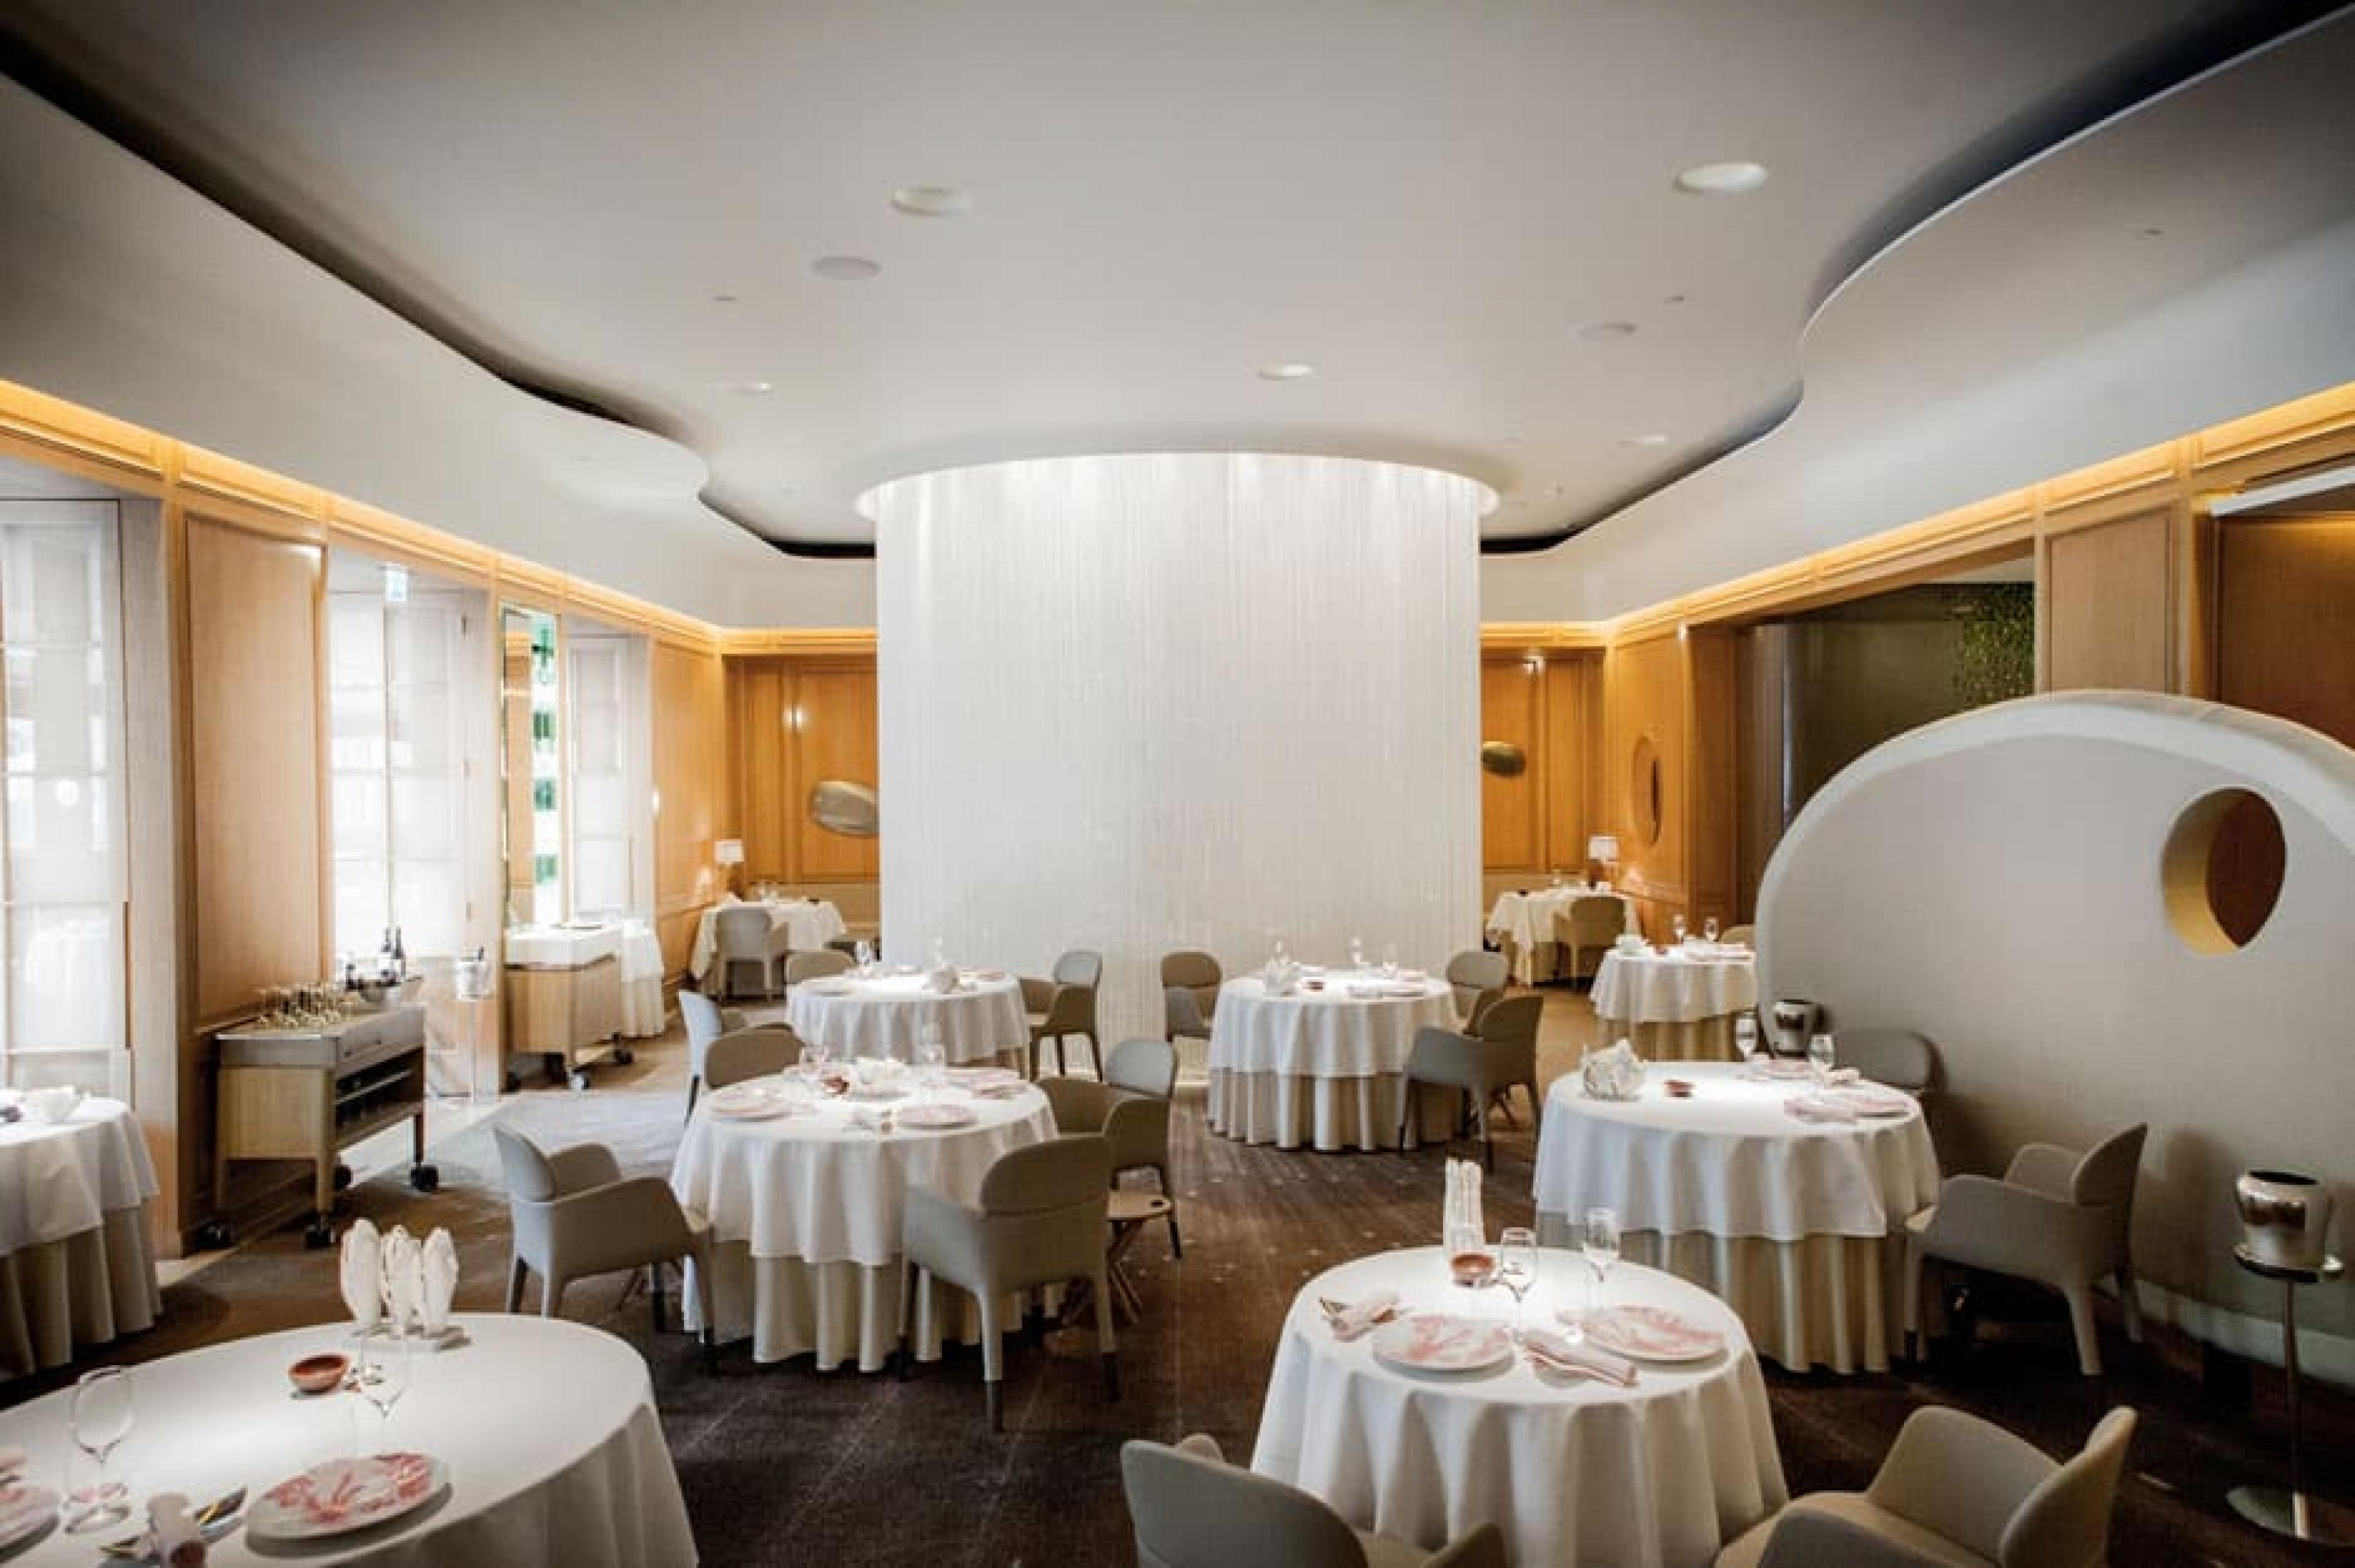 Dinning Area at Alain Ducasse at The Dorchester, London, England - Pierre Monetta